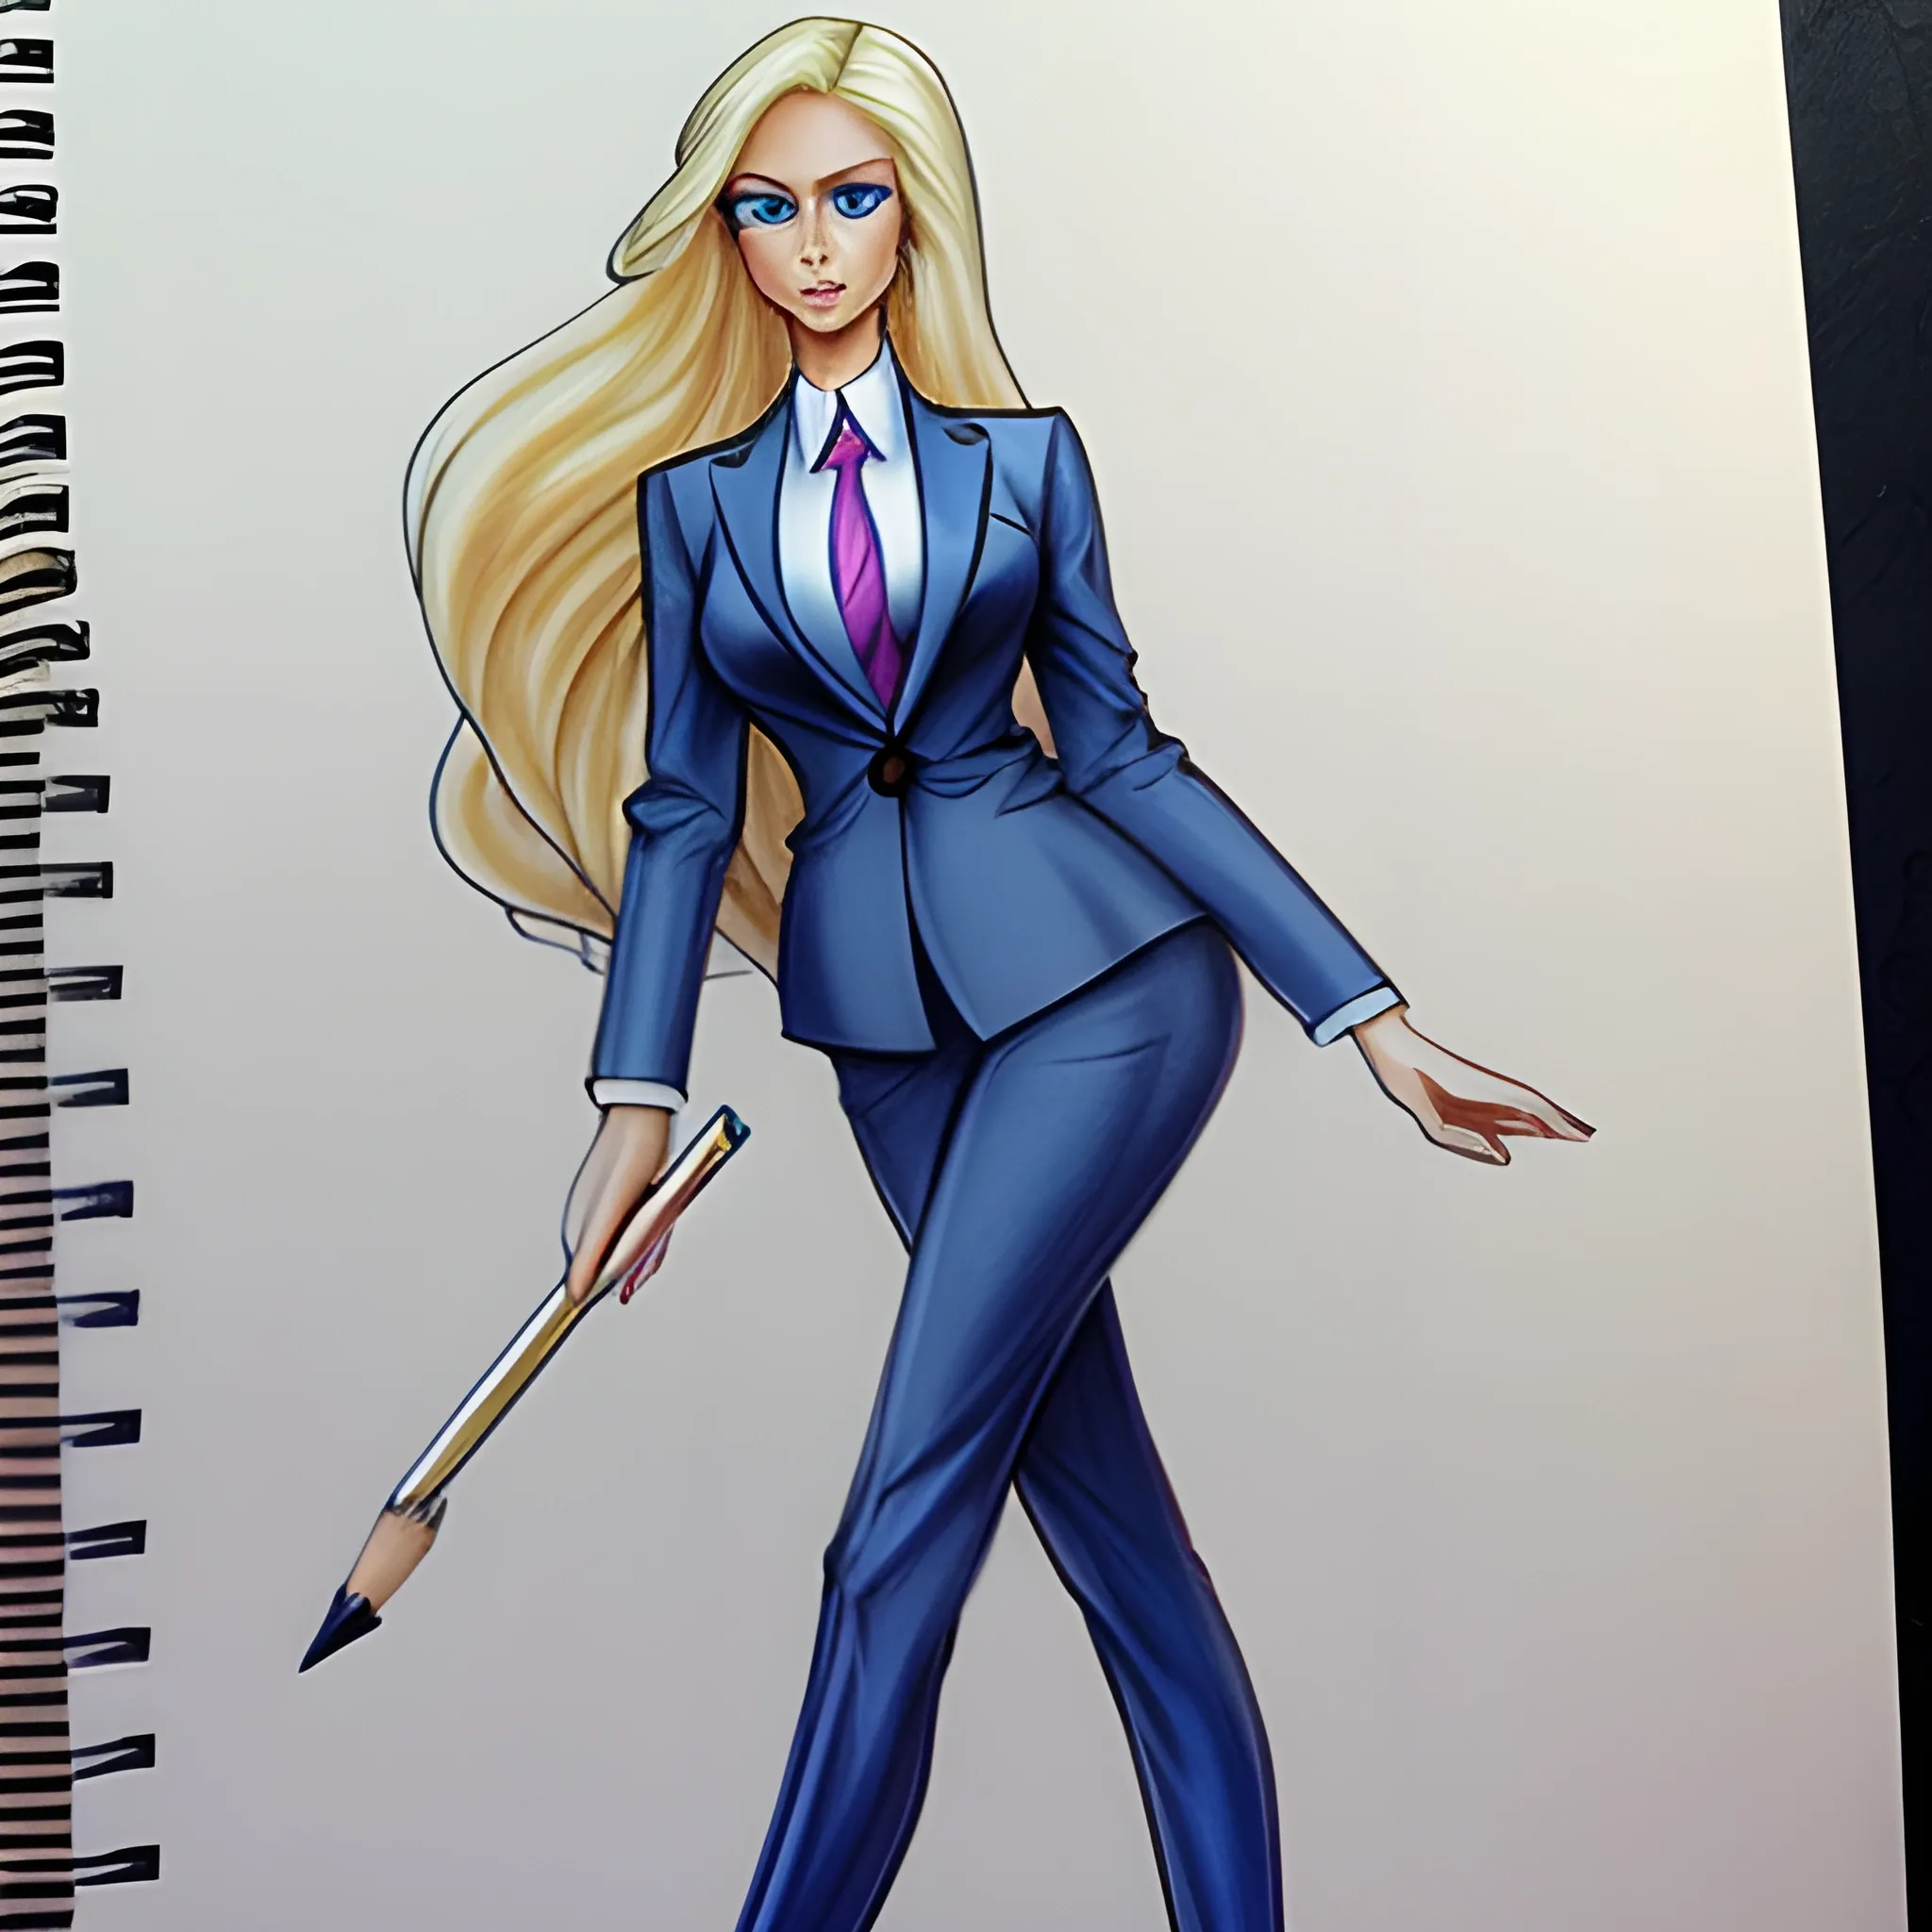 Blue eyes, soft curves, very long and thick blonde hair, dramatic hourglass figure, five-foot five-inches tall, wearing high-heels, business suit, pencil sketch, 3D